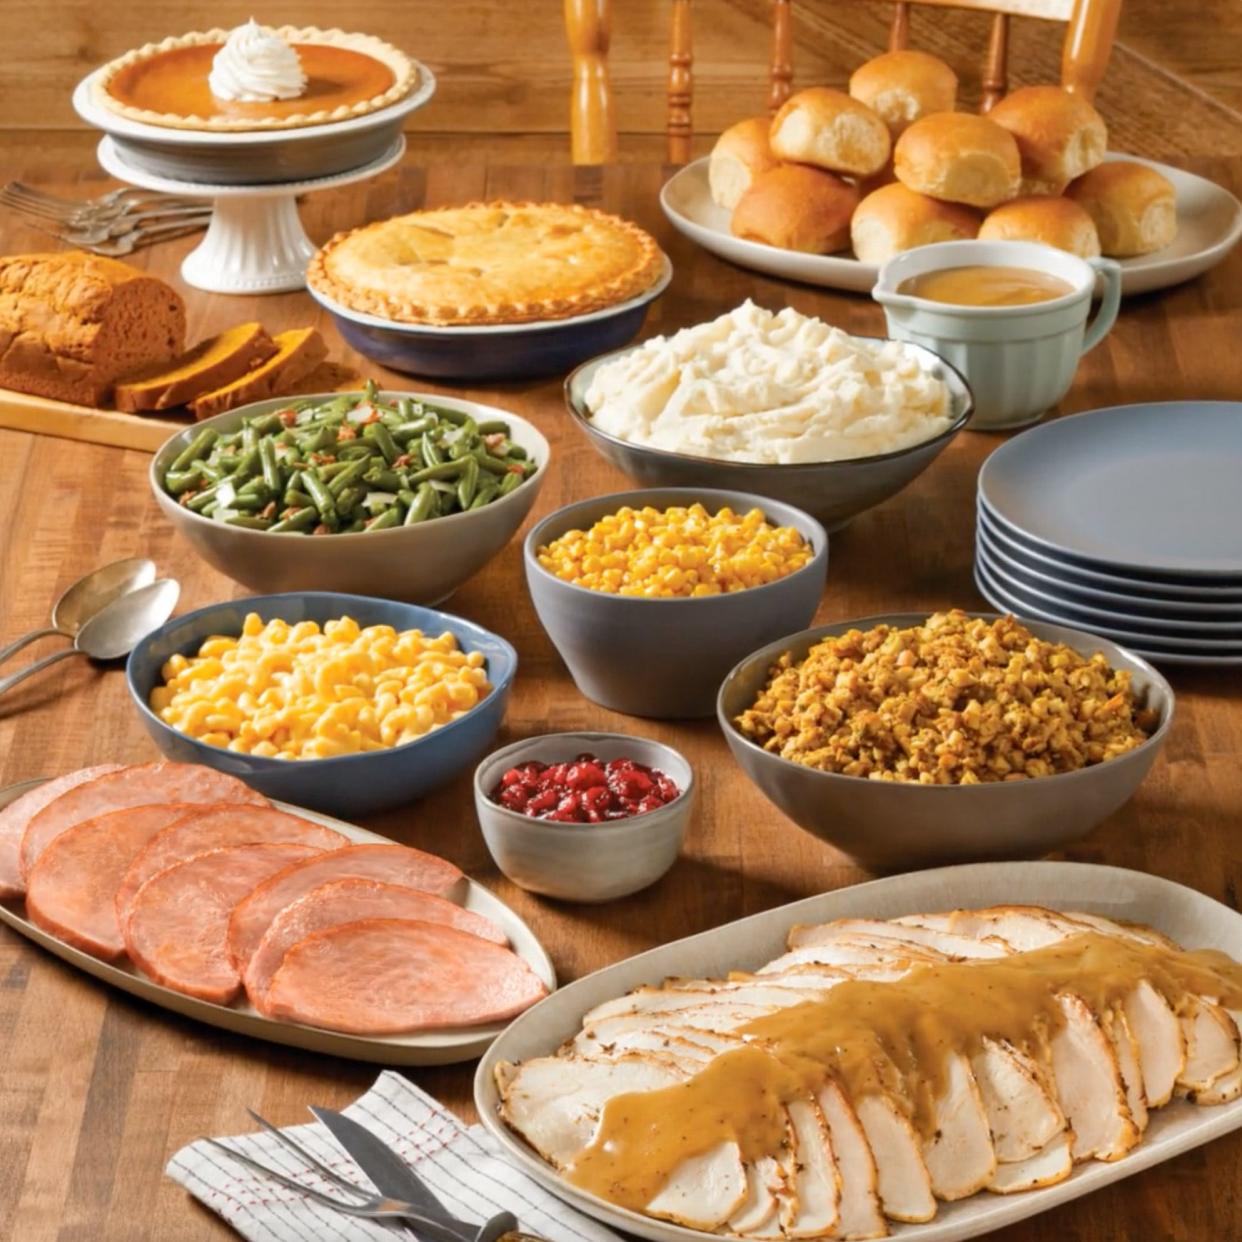 Bob Evans is offering Farmhouse Feasts for families to pick up the day before Thanksgiving.